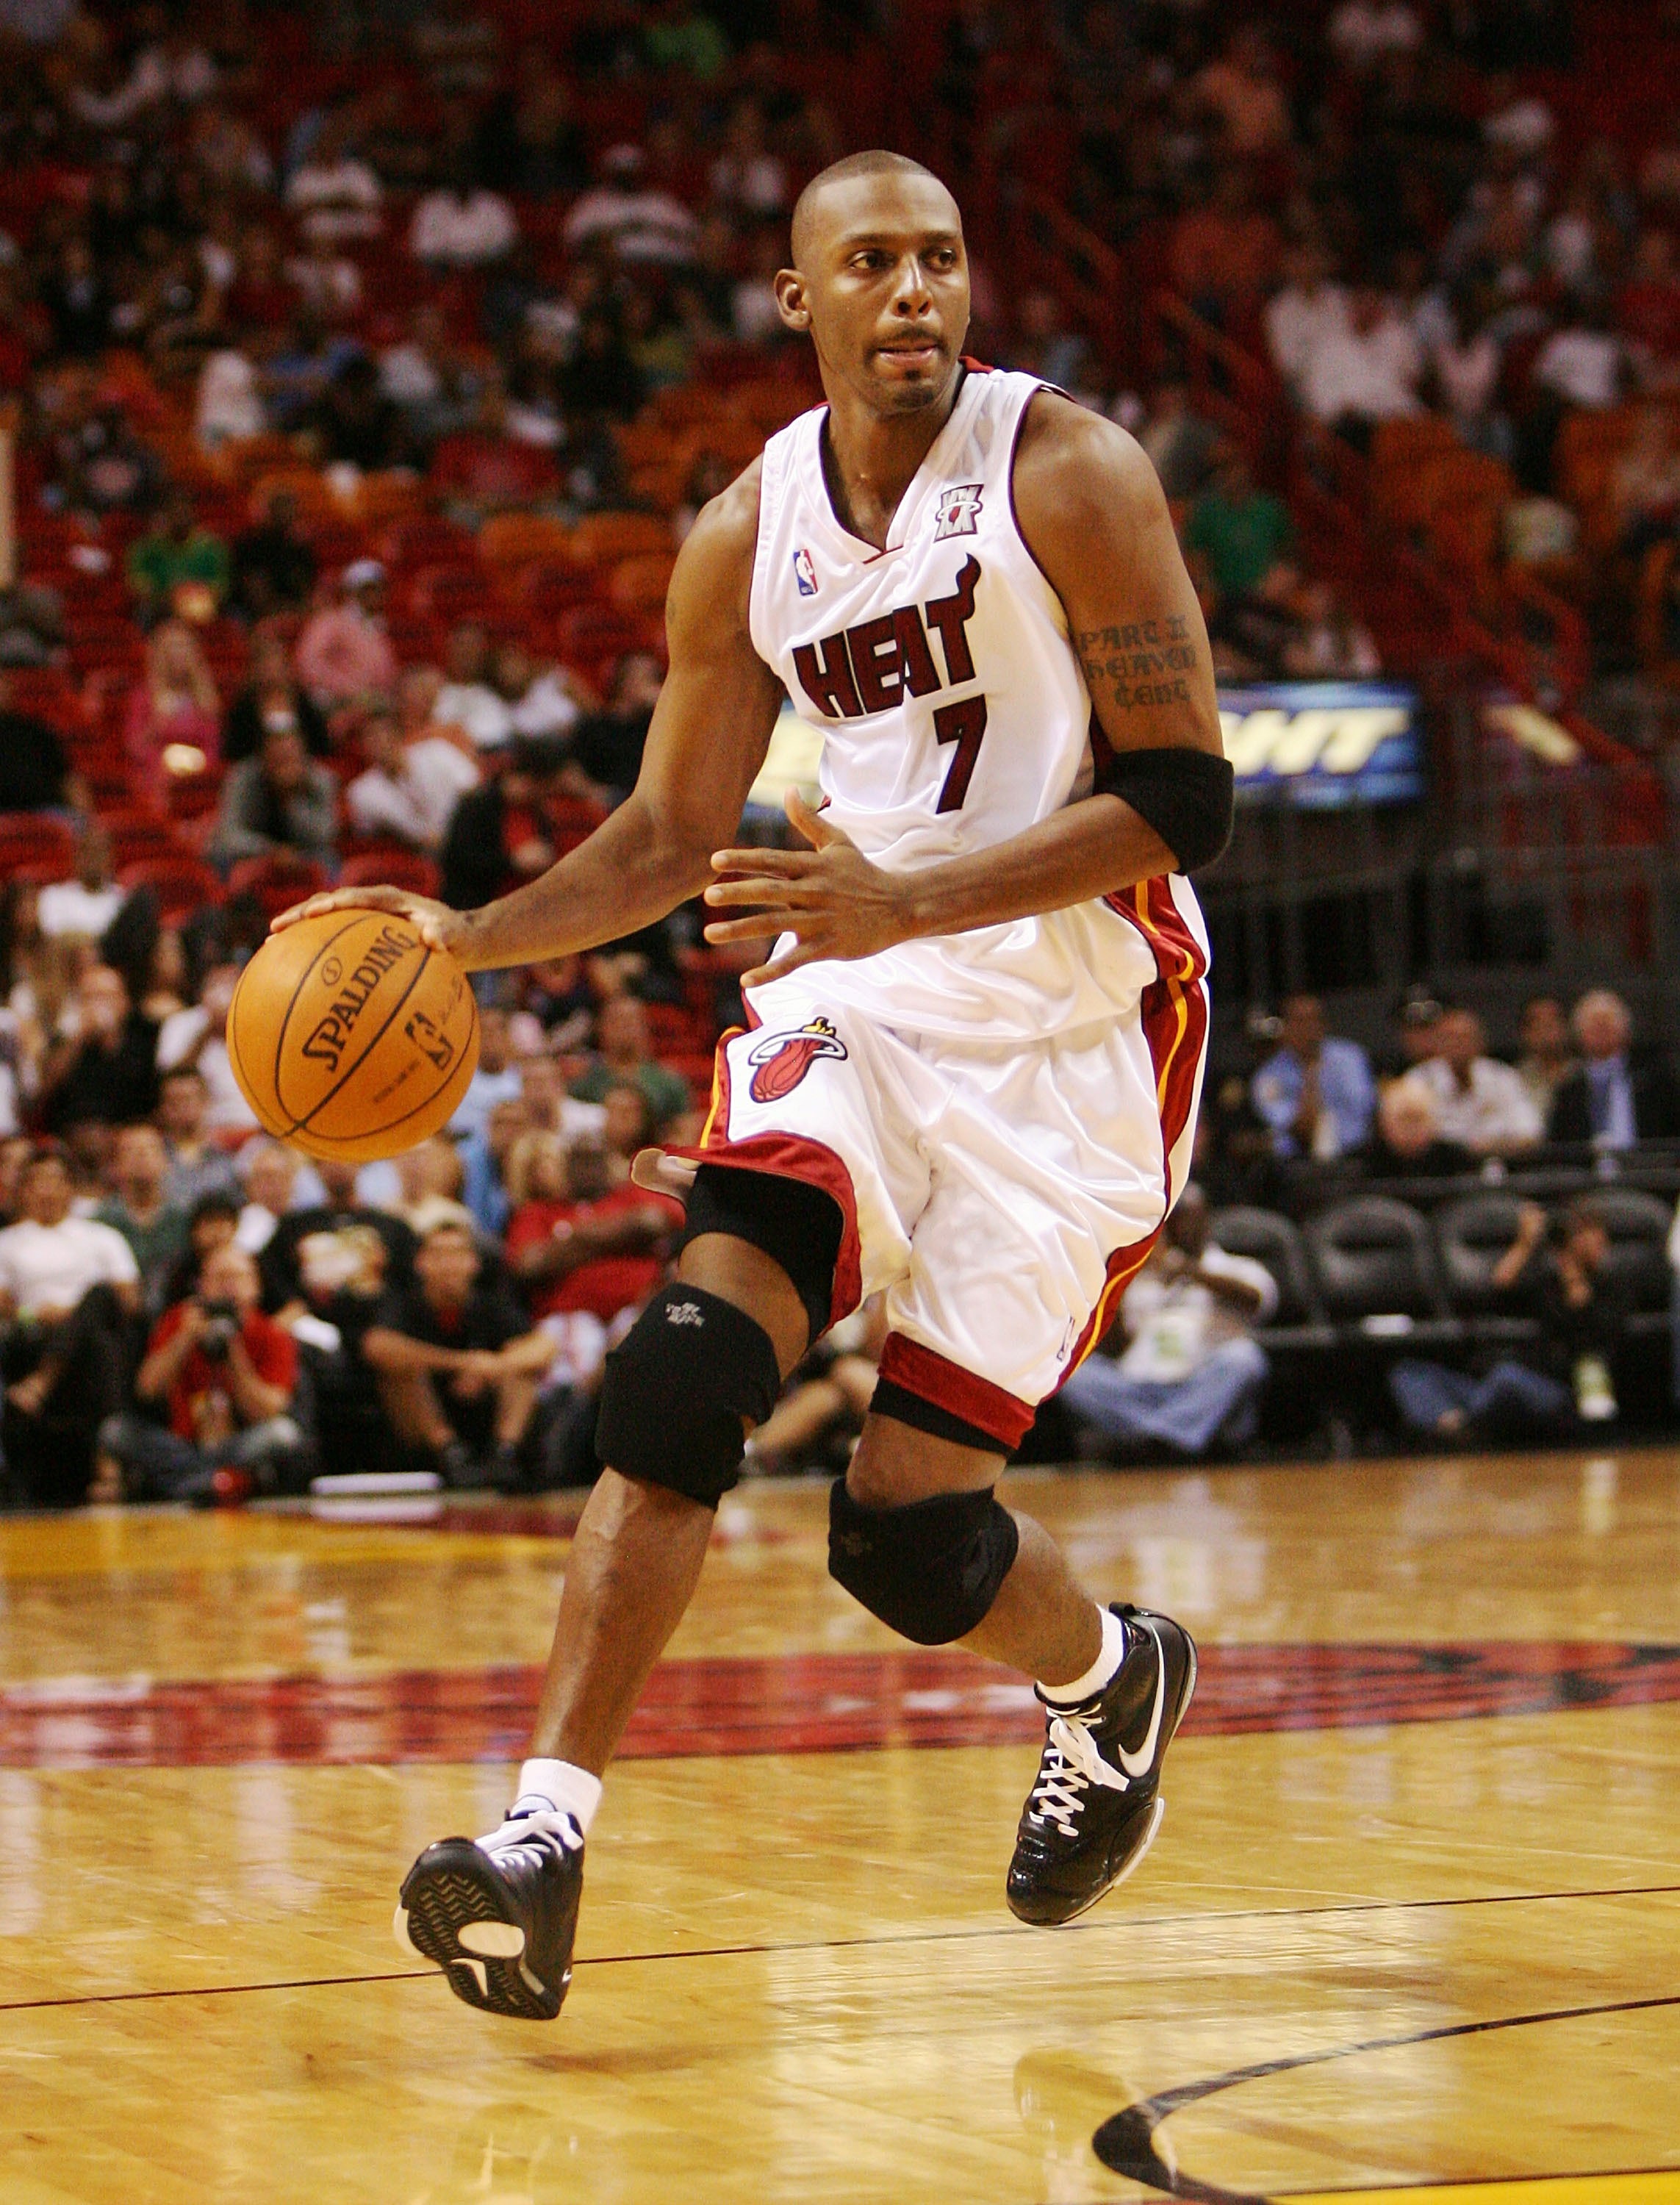 MIAMI - OCTOBER 23:  Penny Hardaway #7 of the Miami Heat drives against the San Antonio Spurs at American Airlines Arena on October 23, 2007 in Miami, Florida. The Spurs defeated the Heat 104-87. NOTE TO USER: User expressly acknowledges and agrees that,